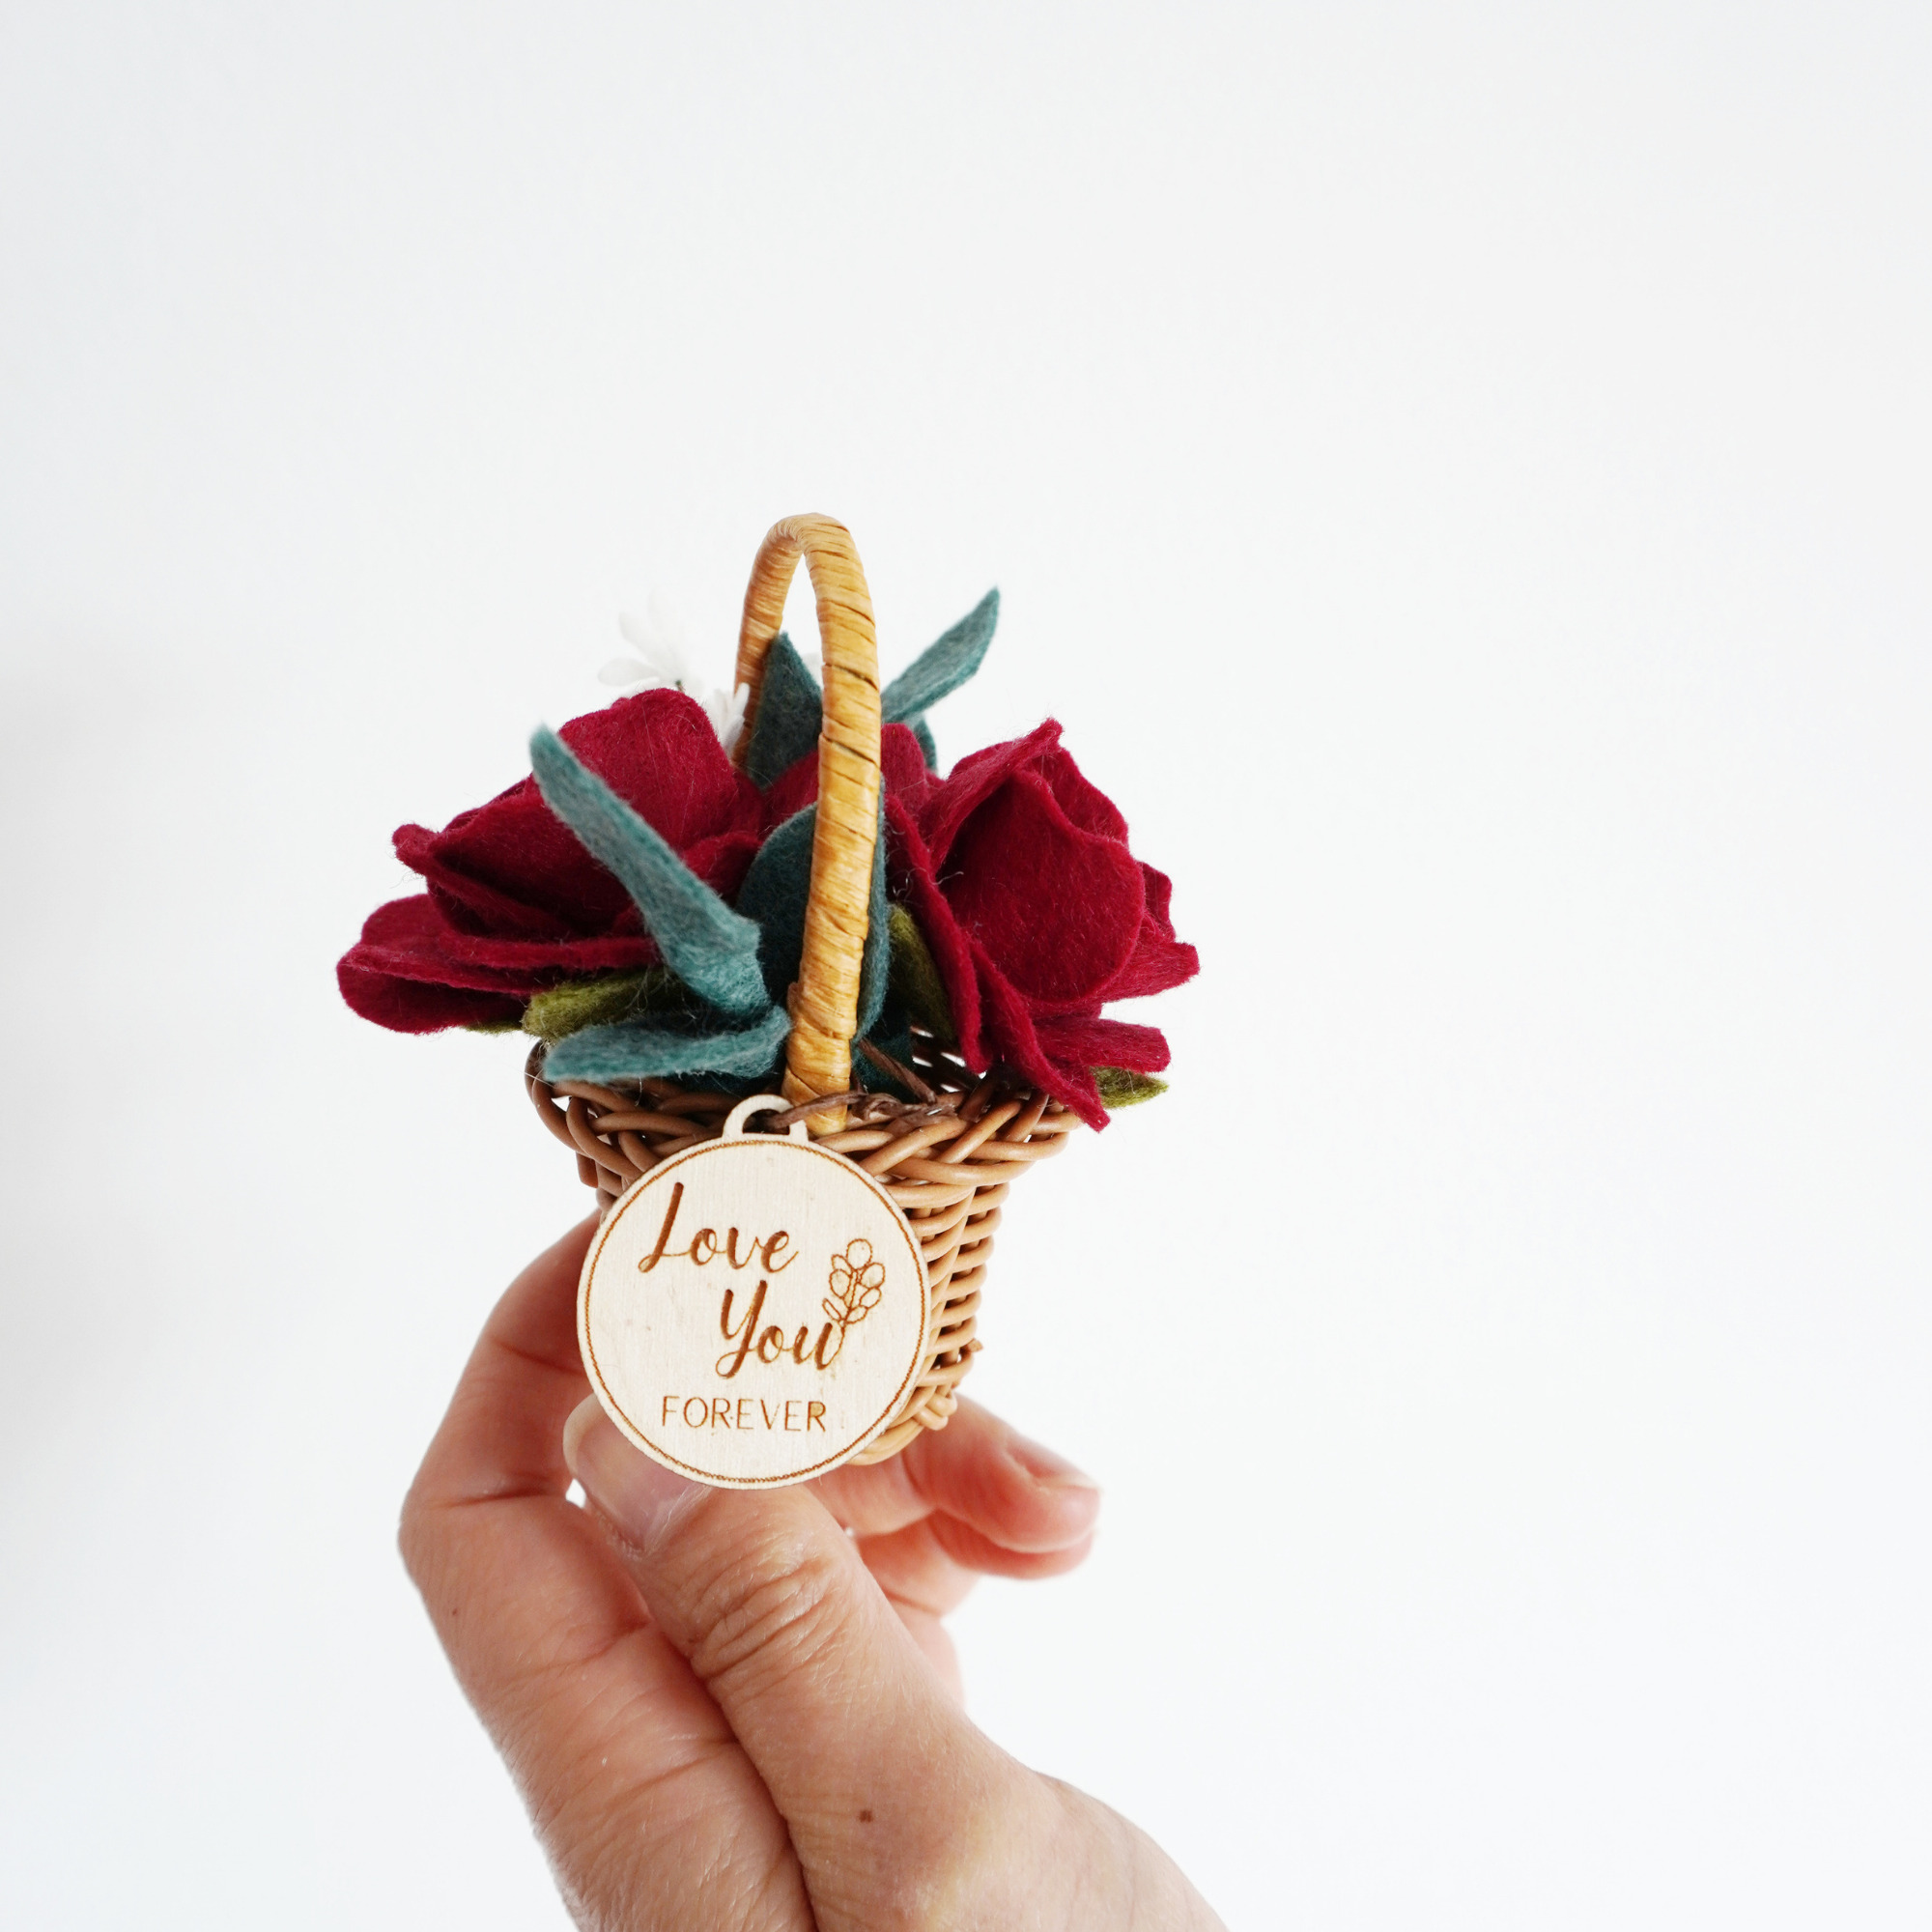 Tiny roses in basket with wooden tag